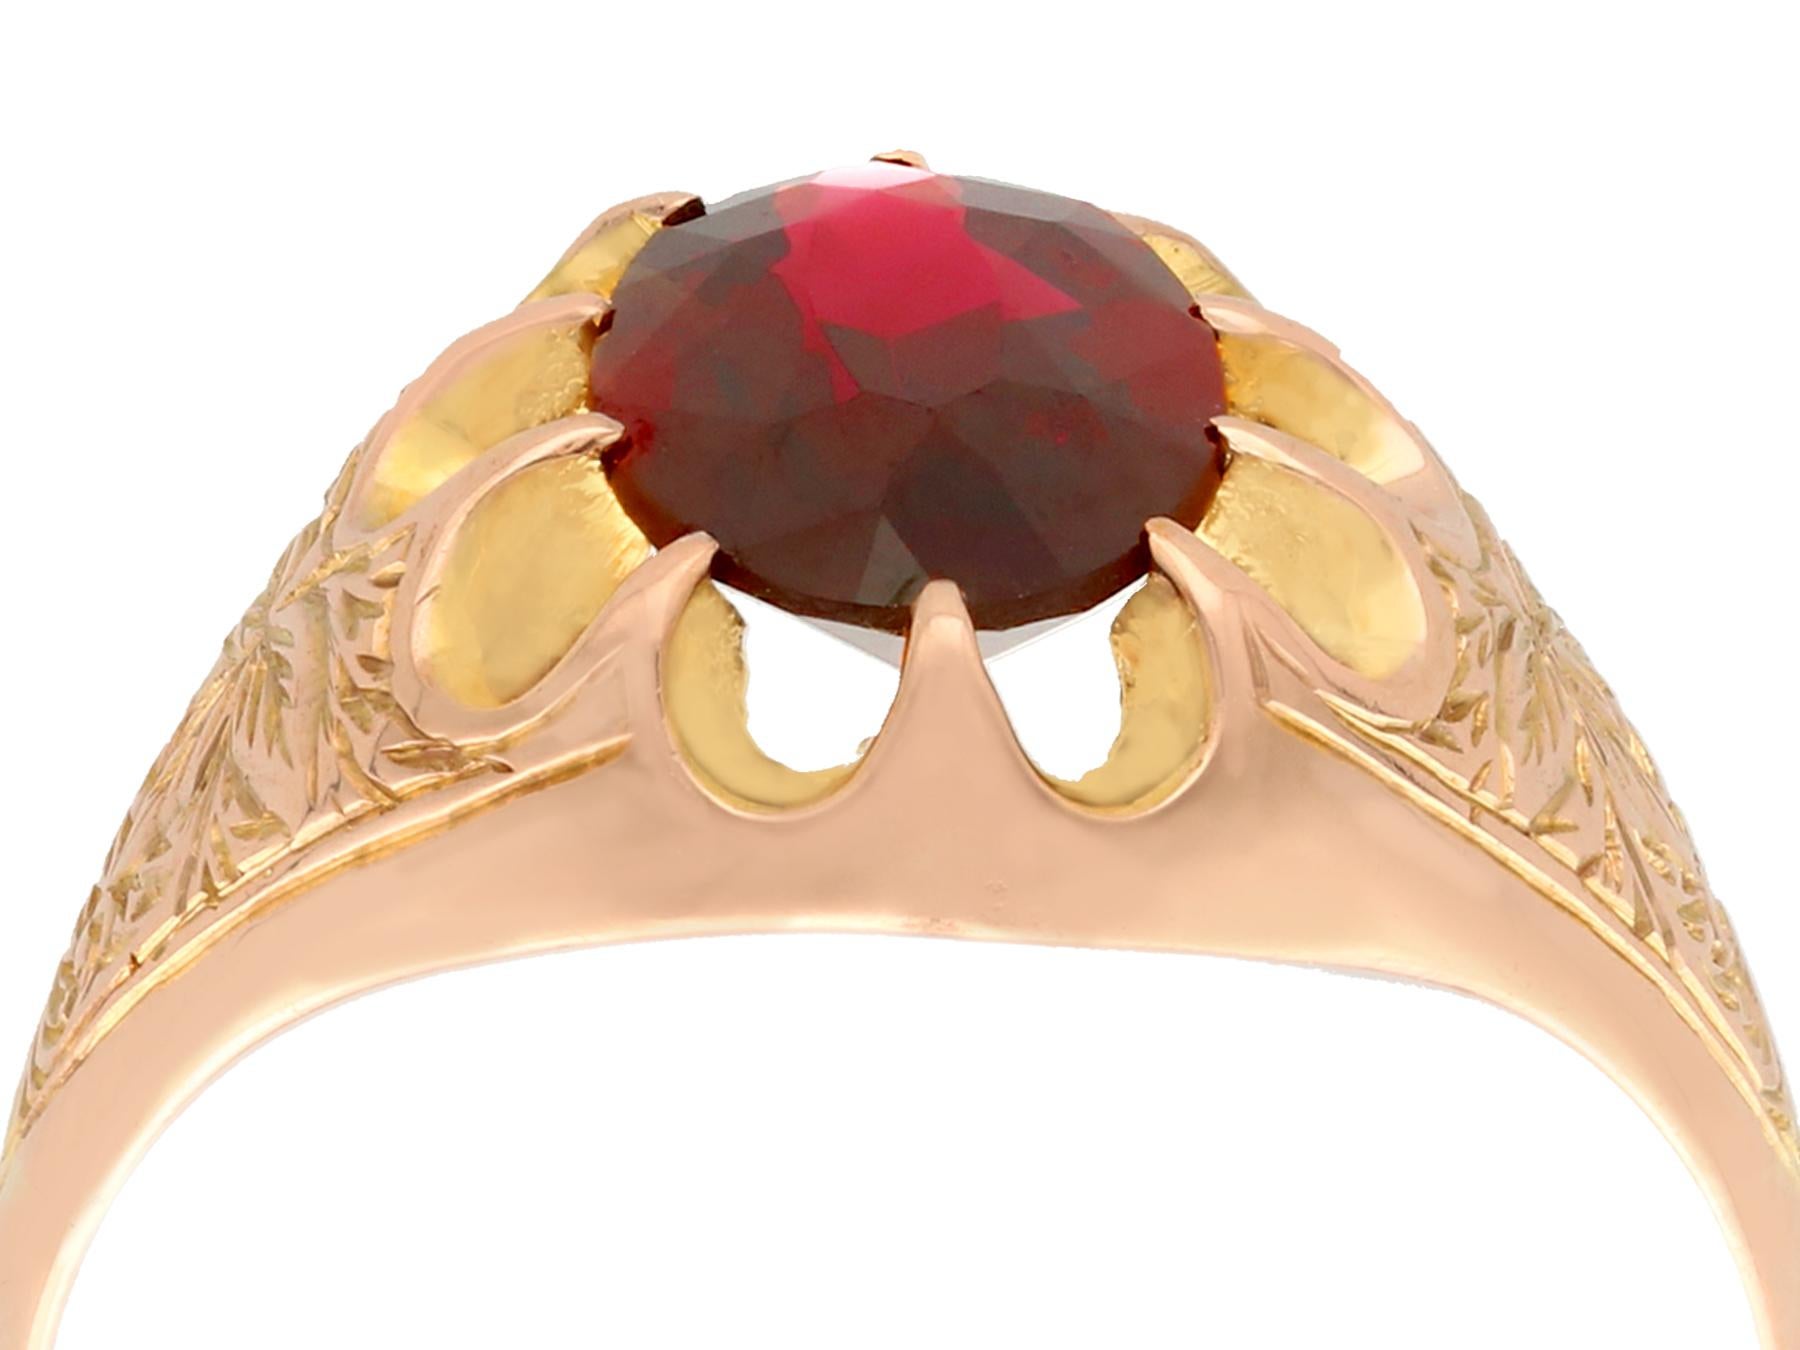 An impressive antique 2.57 carat garnet and 9 karat rose gold dress ring; part of our diverse antique jewelry and estate jewelry collections

This fine and impressive antique ring has been crafted in 9k rose gold.

The multi claw setting displays a